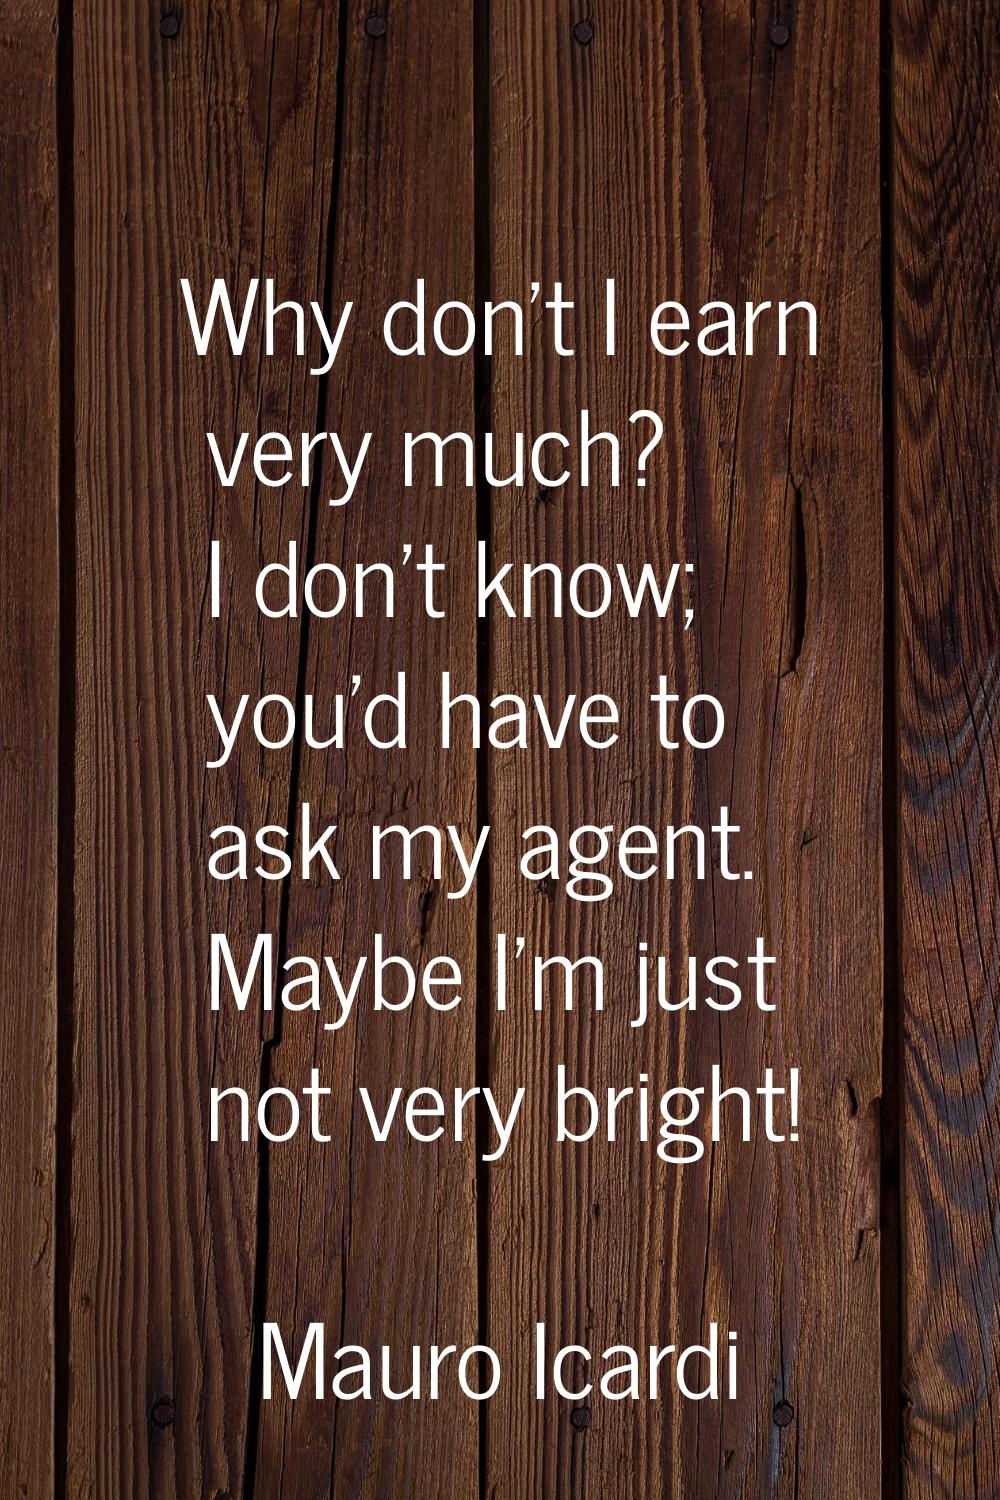 Why don't I earn very much? I don't know; you'd have to ask my agent. Maybe I'm just not very brigh